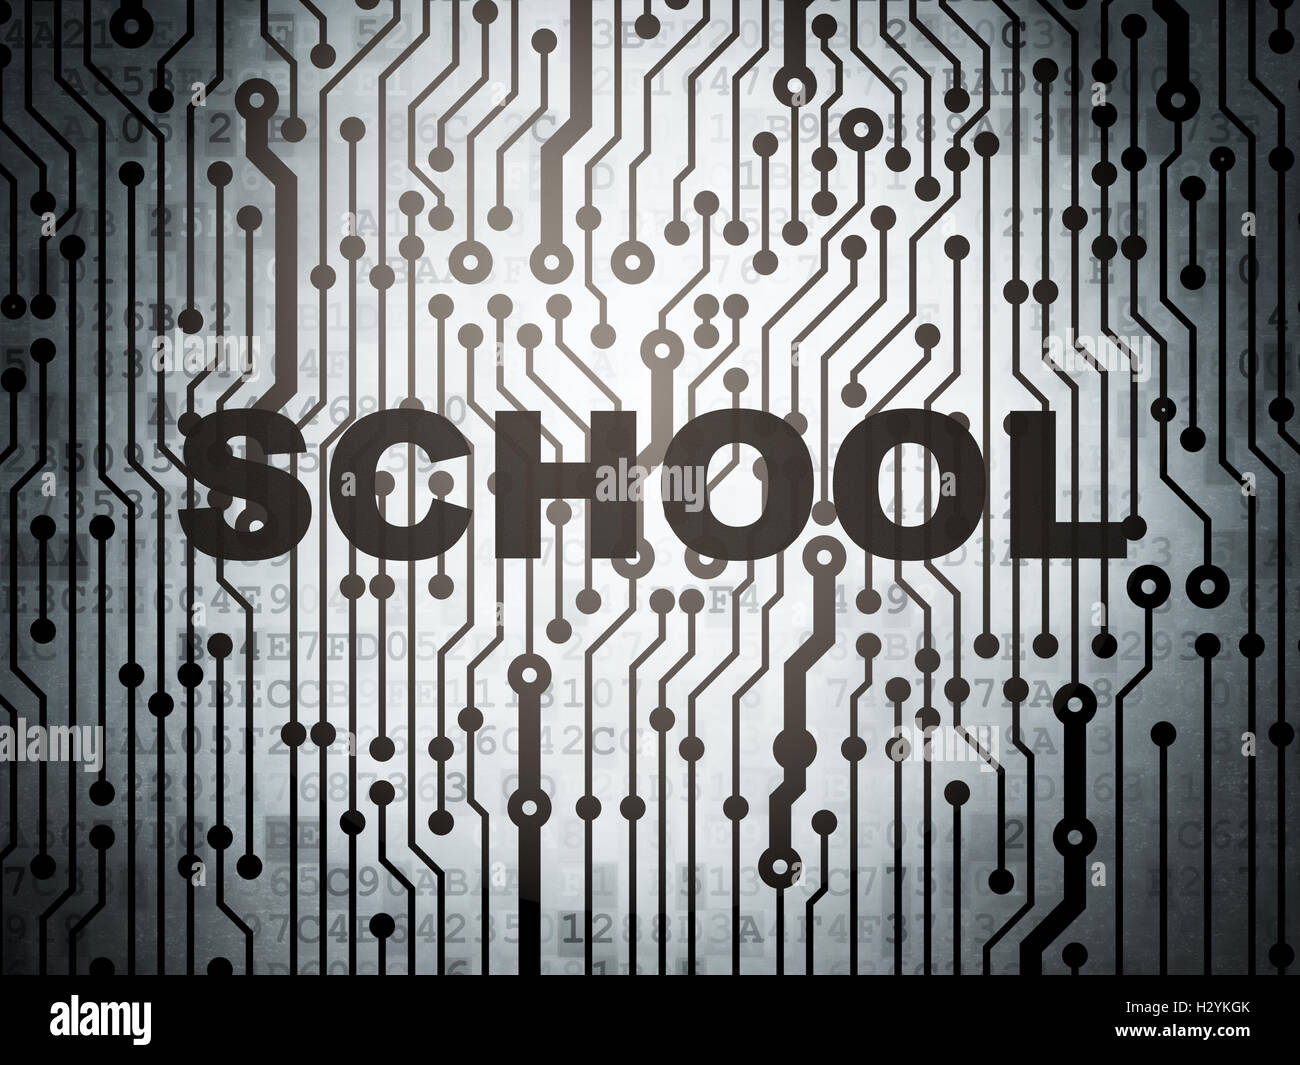 Education concept: circuit board with School Stock Photo